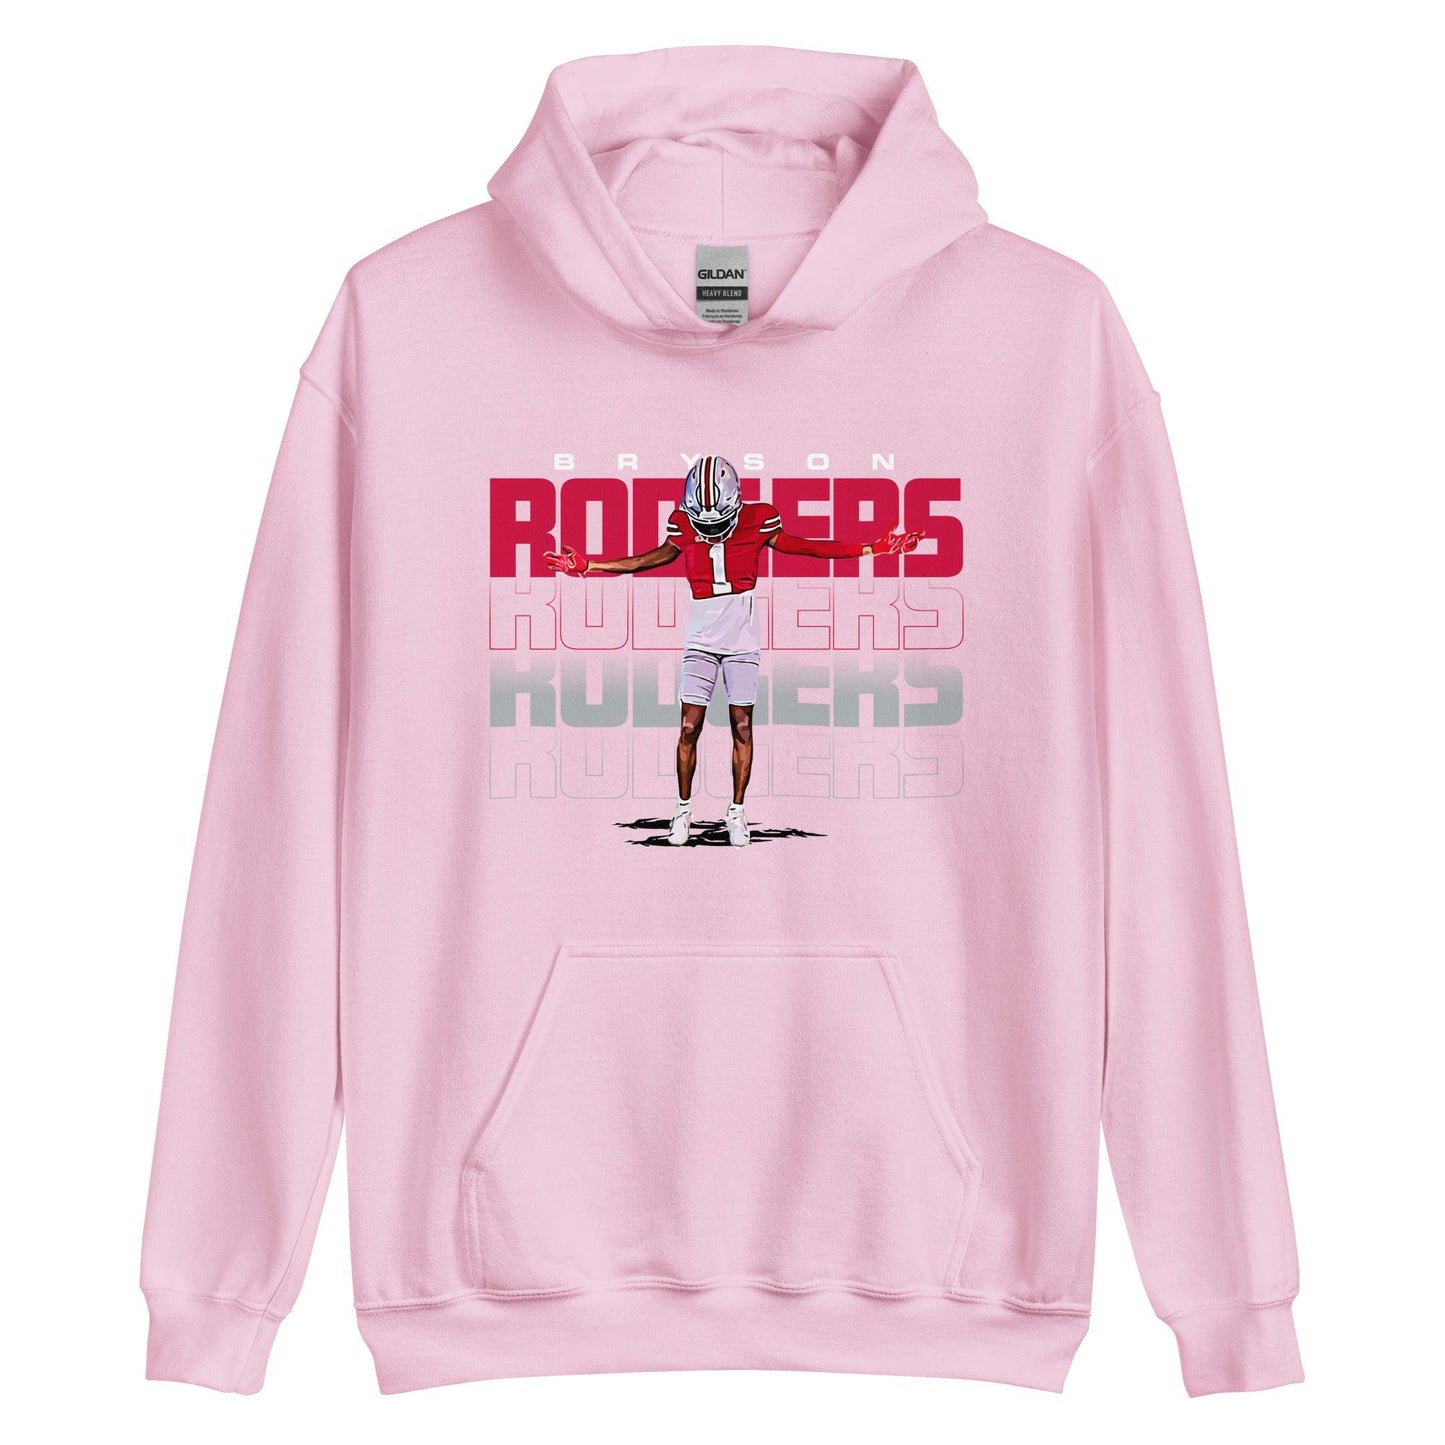 Bryson Rodgers "Gameday" Hoodie - Fan Arch